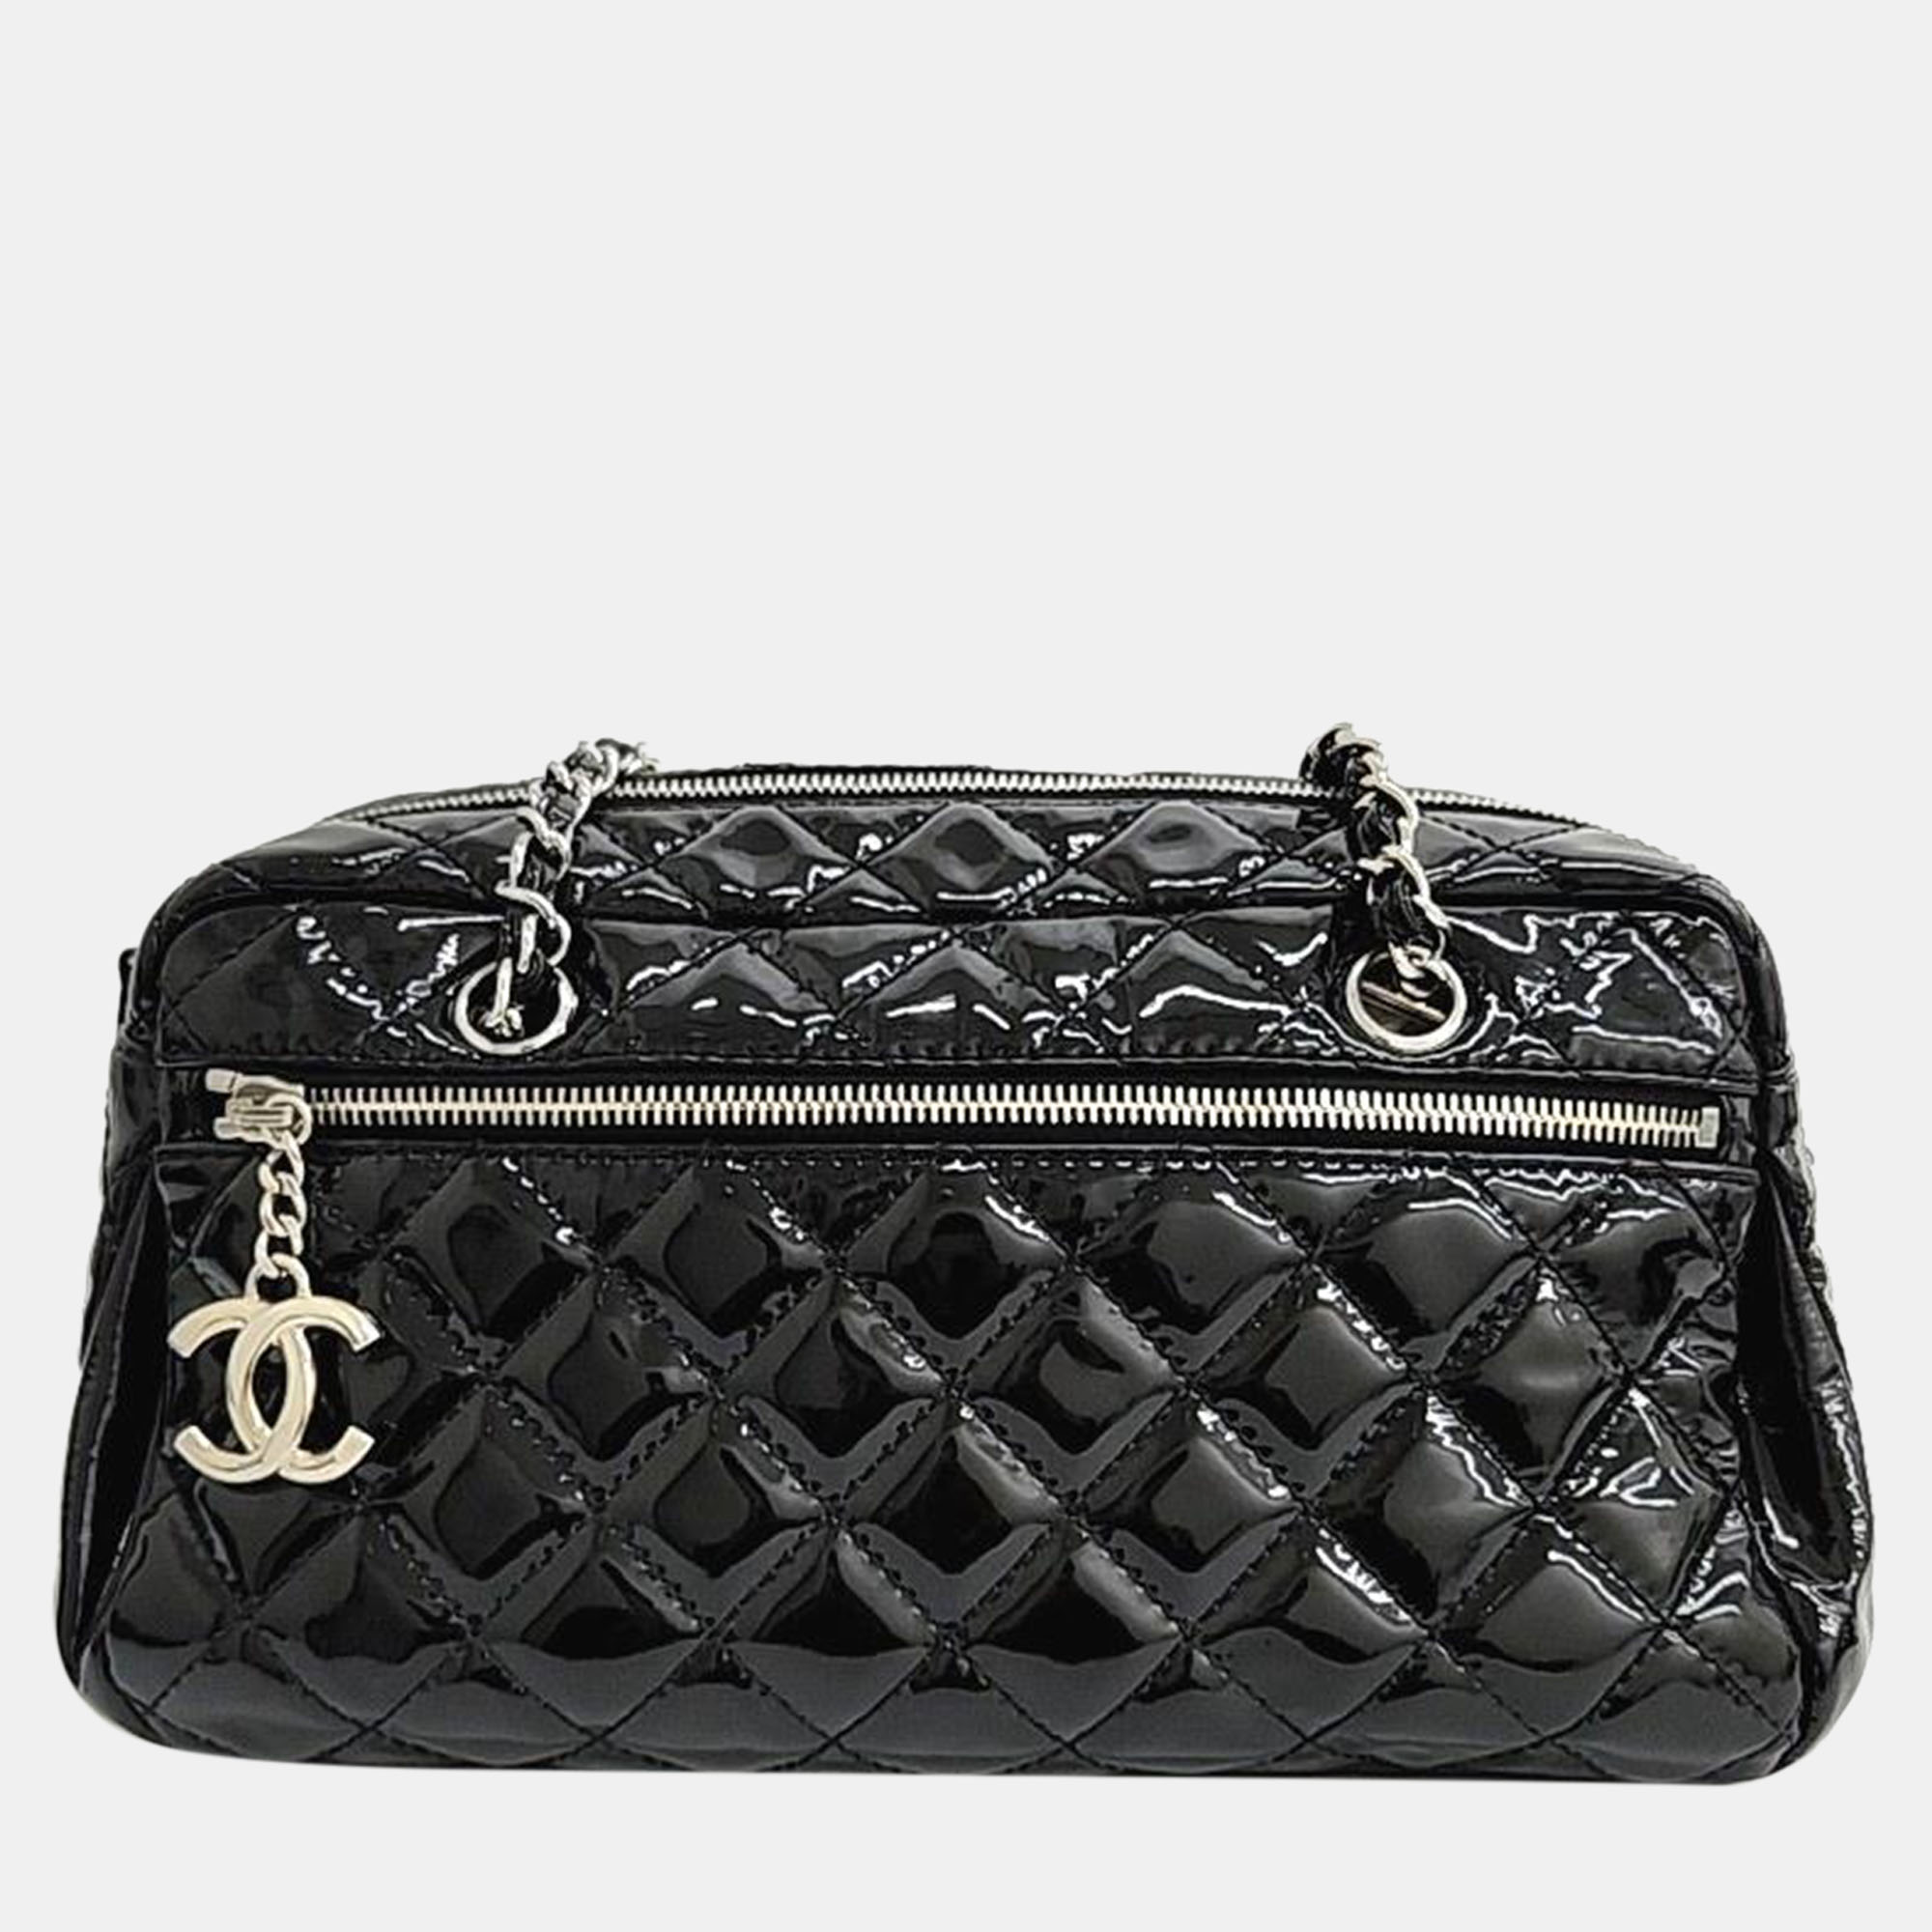 Chanel black patent leather quilted bowler bag